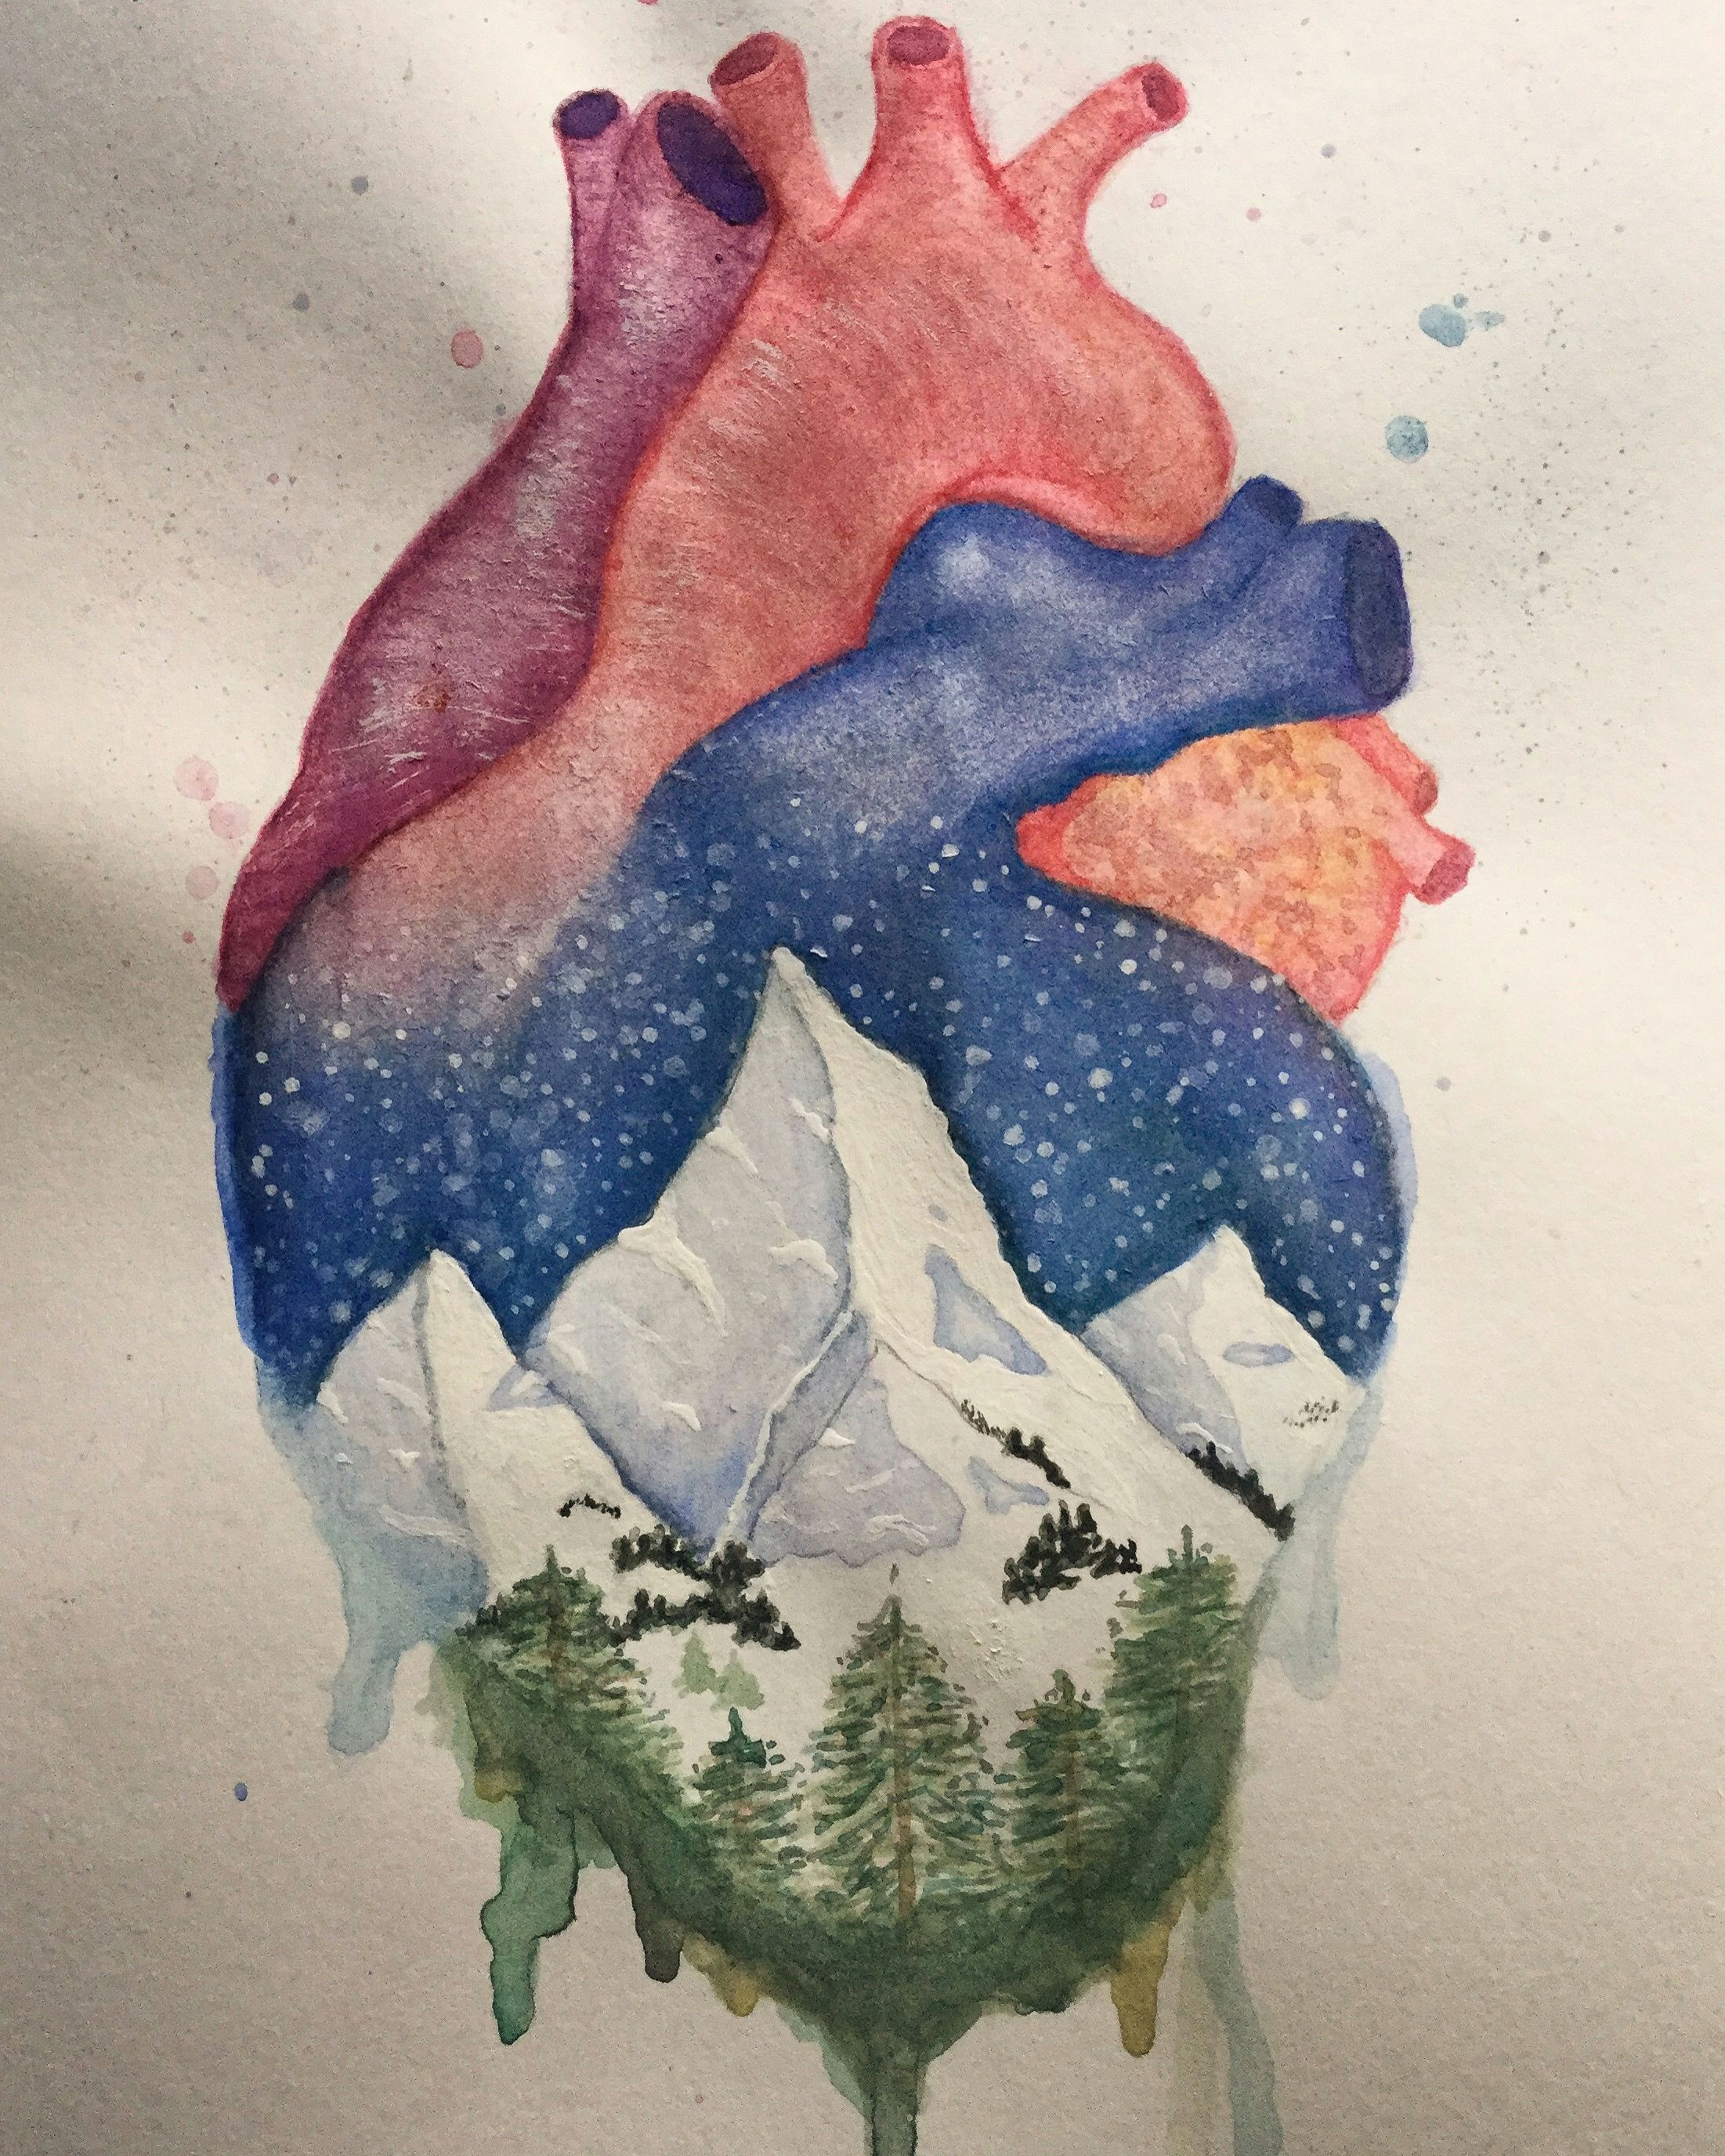 anatomical heart and winter mountain landscape watercolor painting